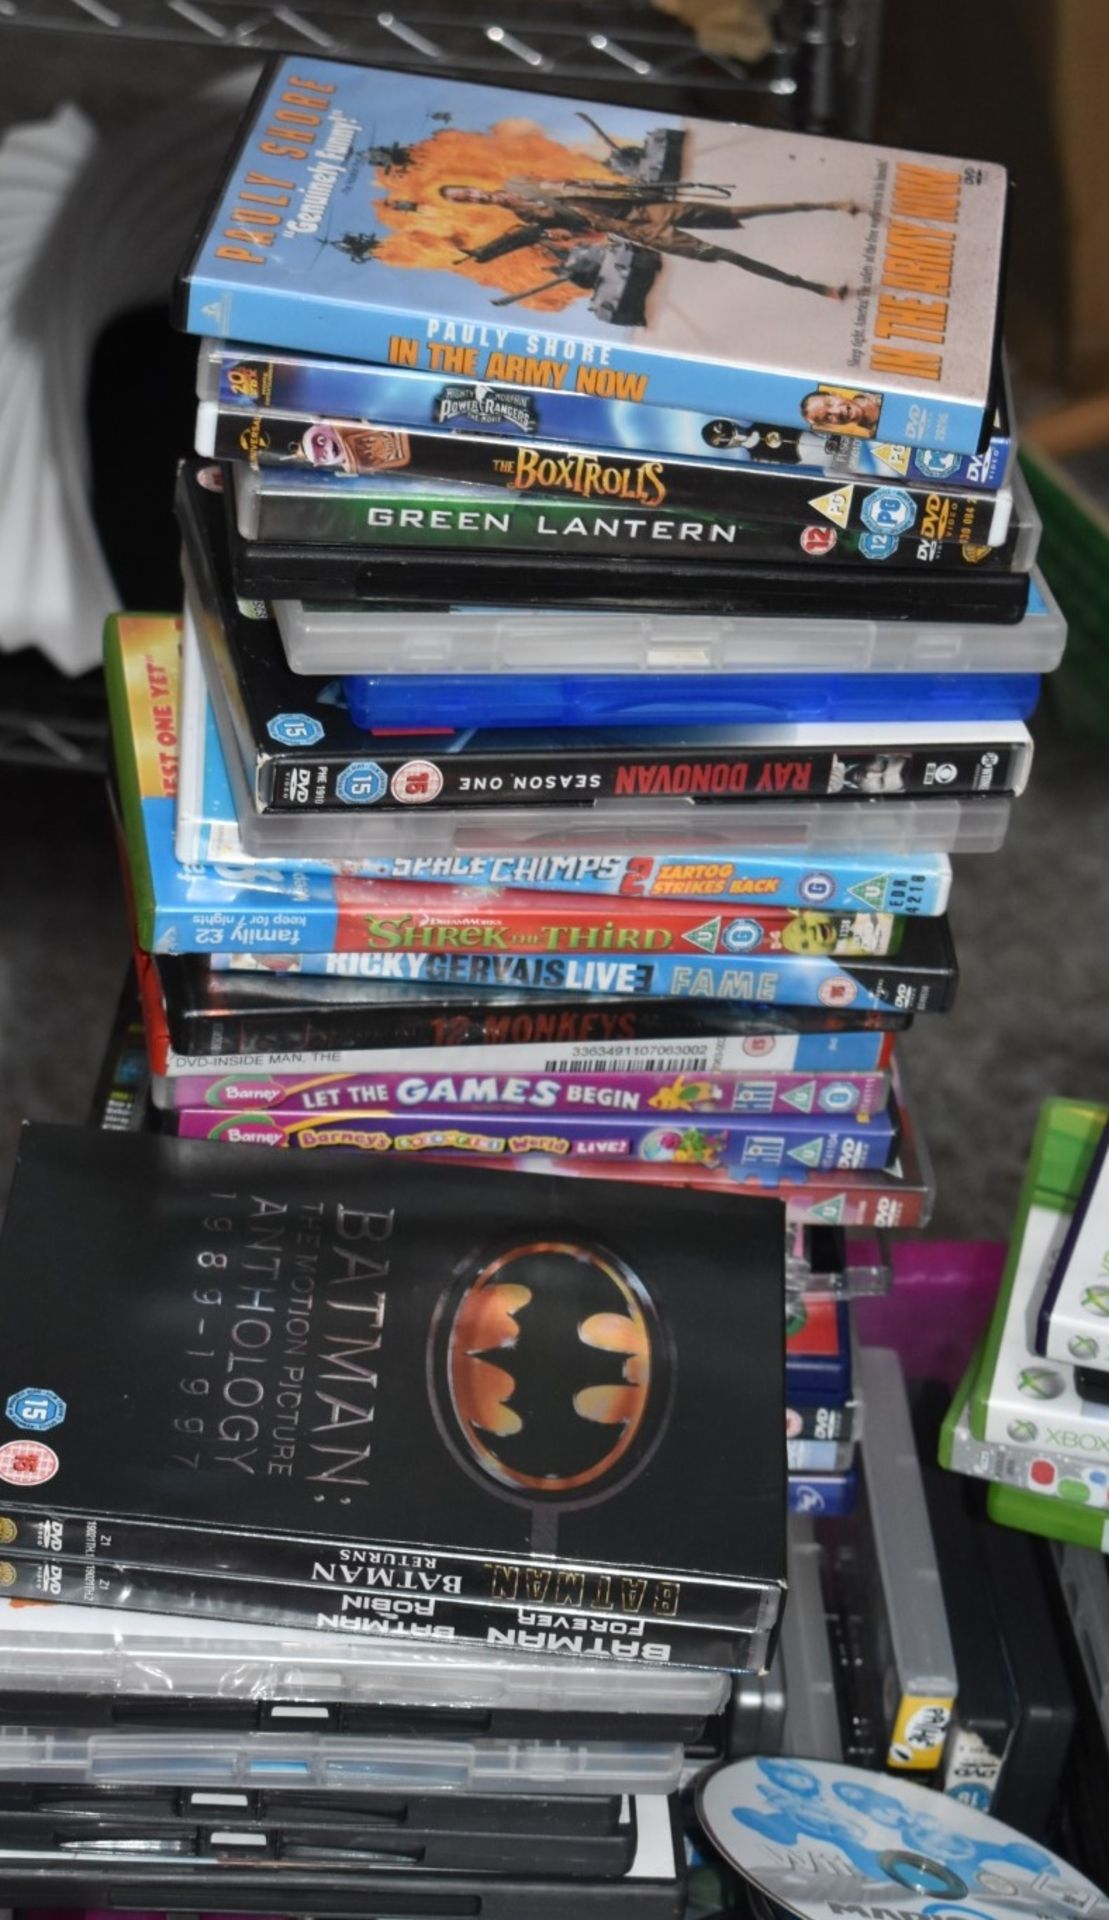 1 x Large Collection of DVD Films and Games - Plus Box Sets and Portable DVD Player - Ref: In2108 - Image 2 of 10